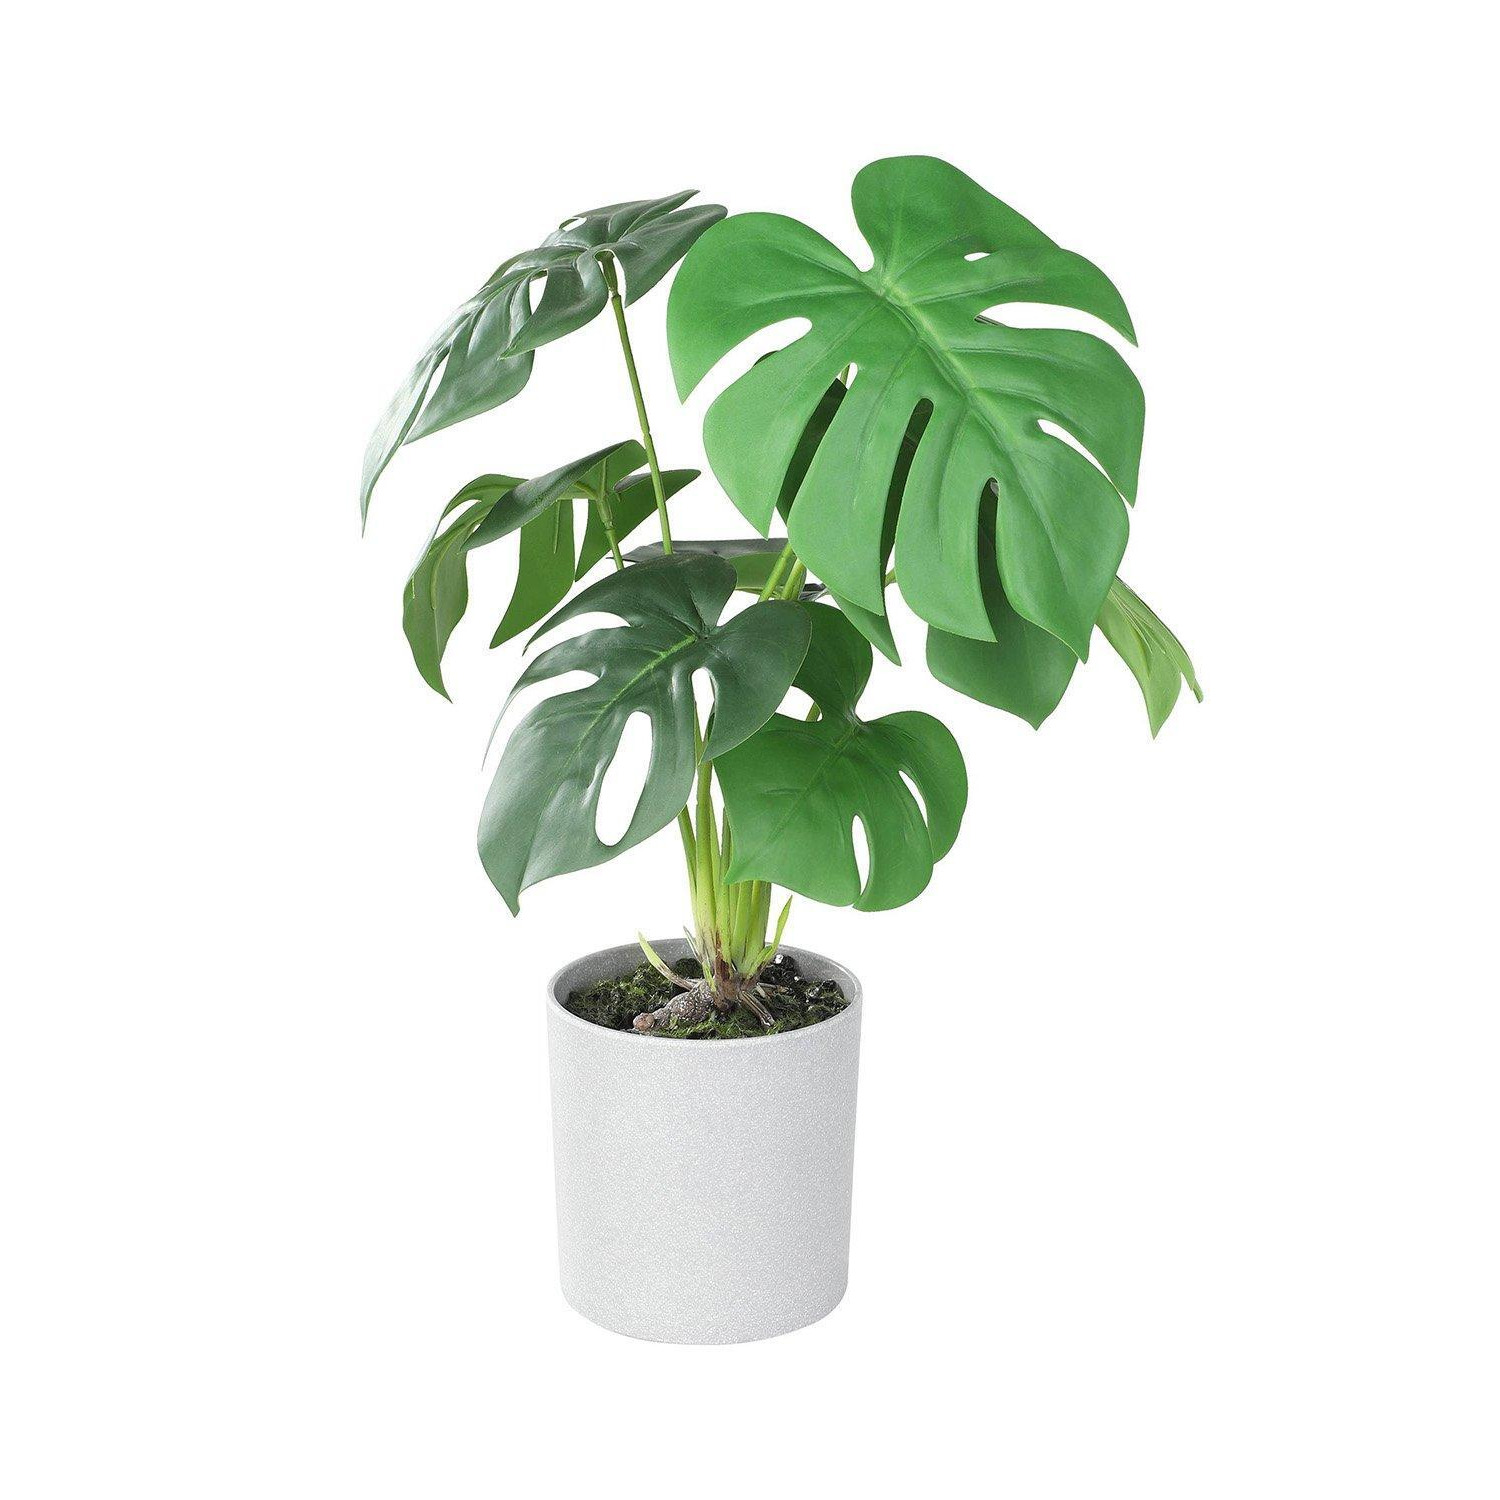 Tobetsu Artificial Swiss Cheese Plant With Grey Plastic Pot - image 1